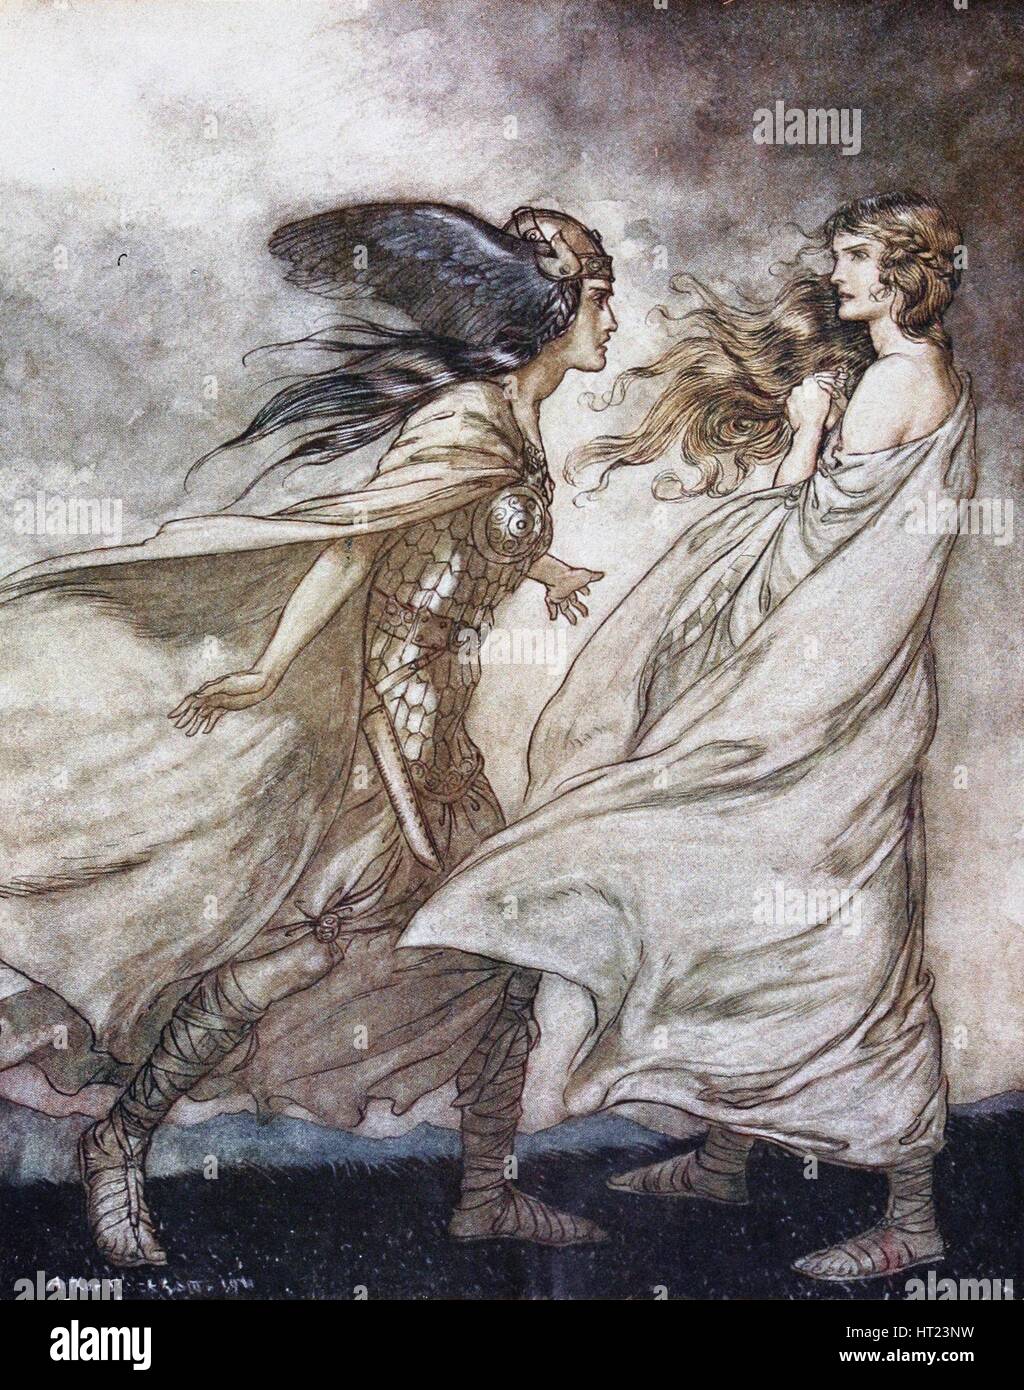 The ring upon thy hand. Illustration for Siegfried and The Twilight of the Gods by Richard Wagner, Artist: Rackham, Arthur (1867-1939) Stock Photo